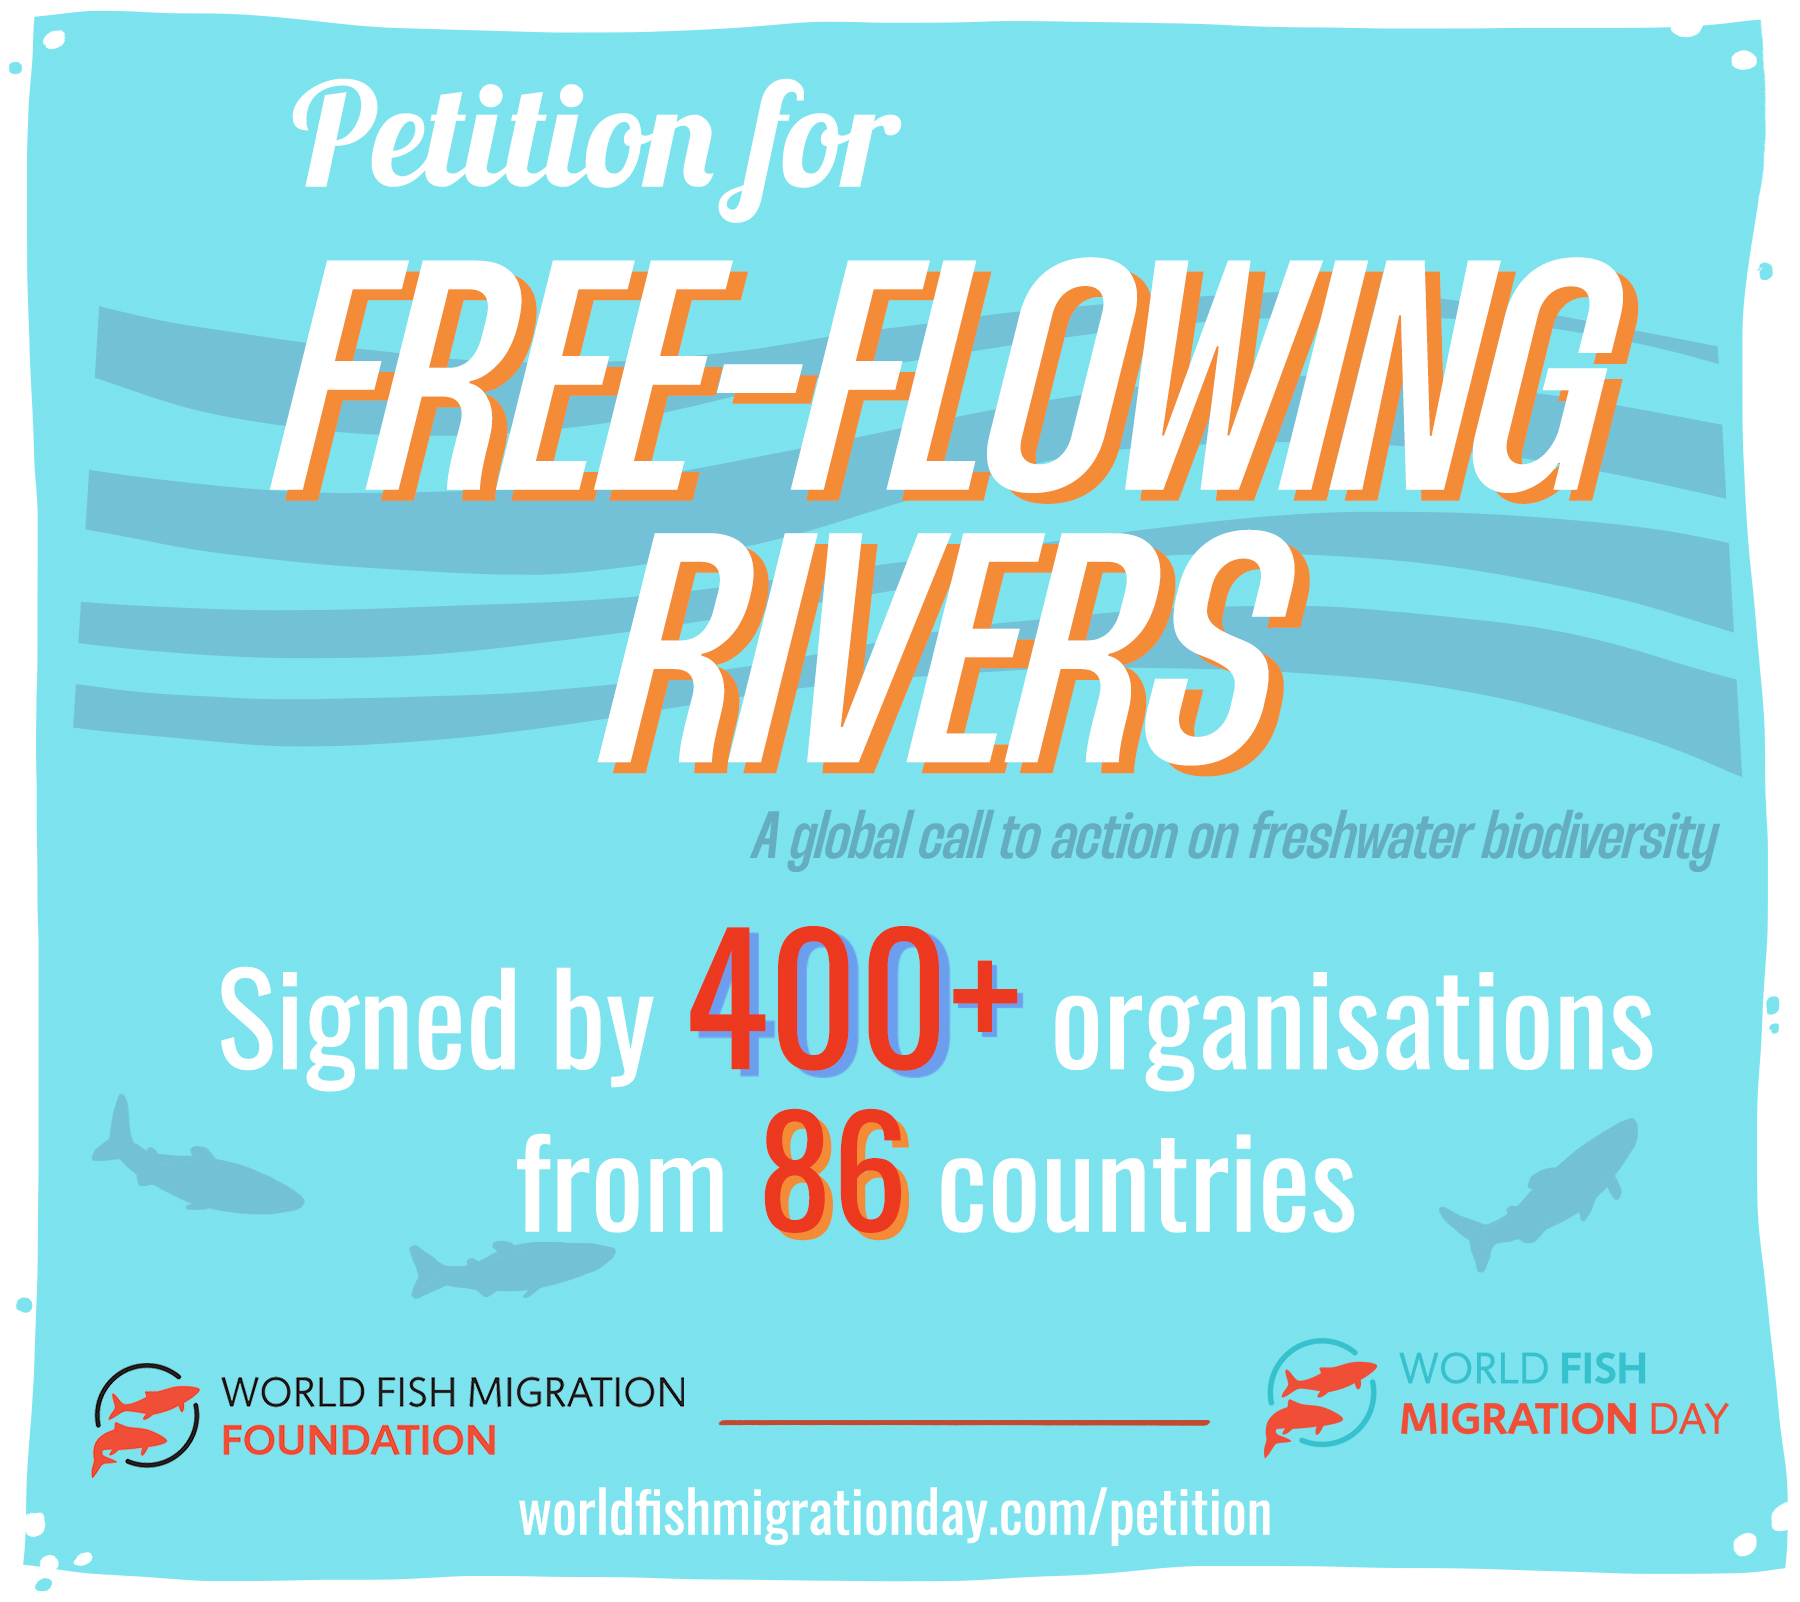 400+ organizations call for urgent action to save migratory freshwater fish and free-flowing rivers